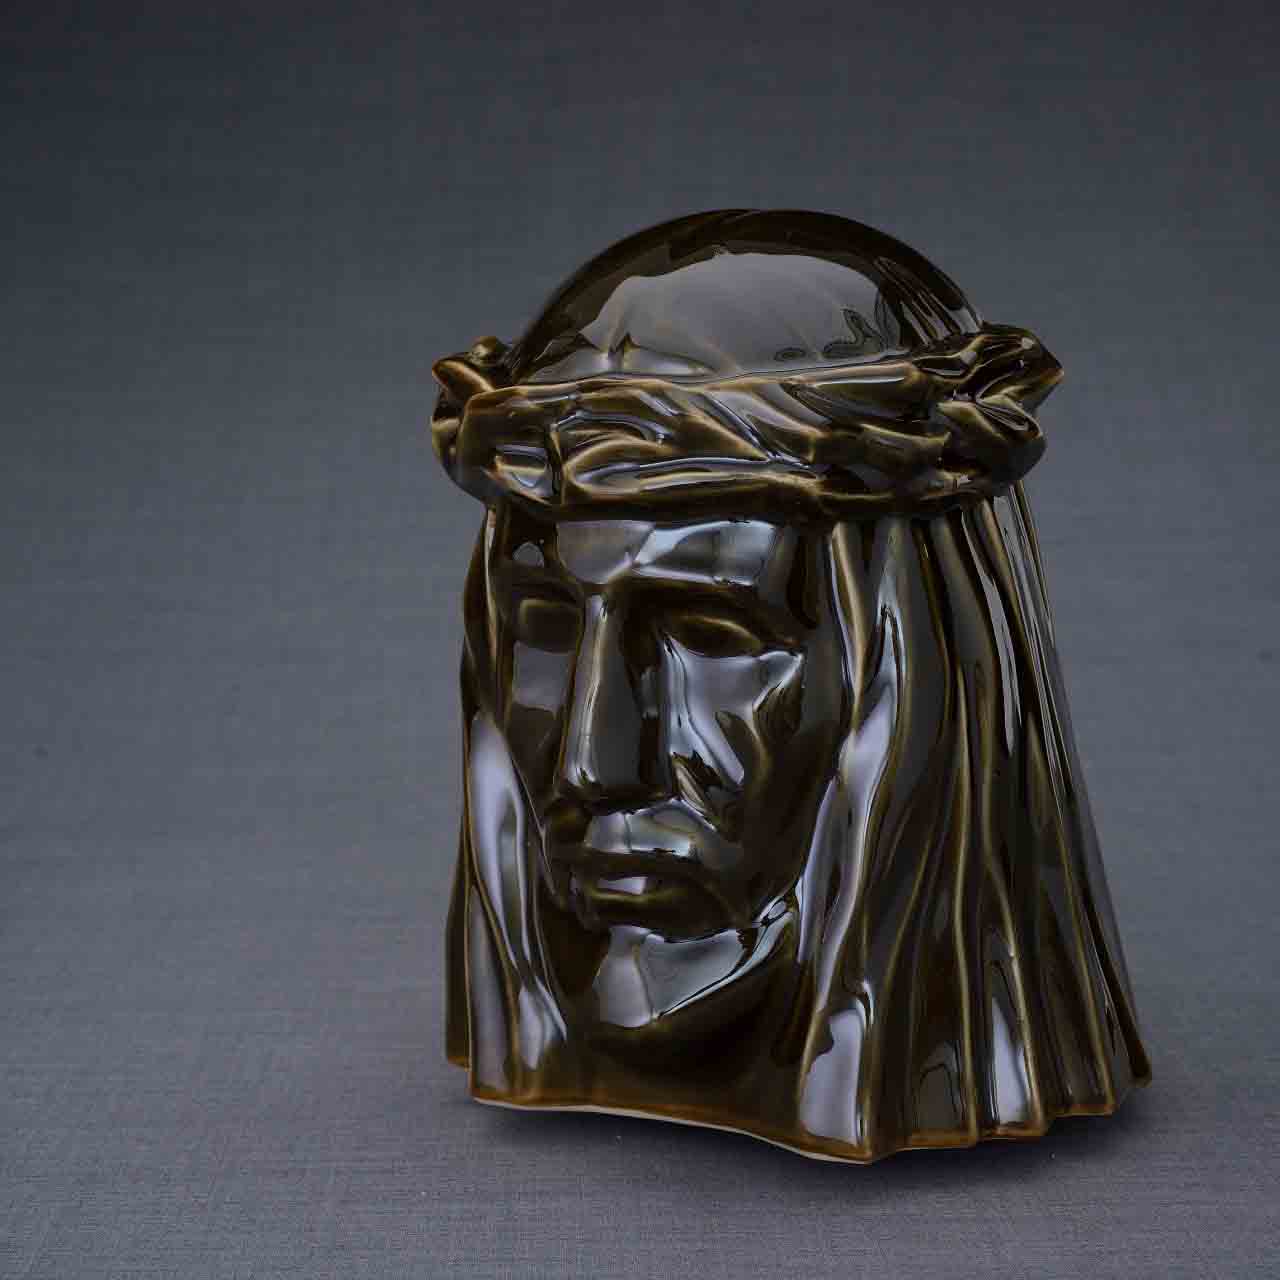 The Christ Cremation Urn for Ashes in Oily Brown Turned Left Dark Background